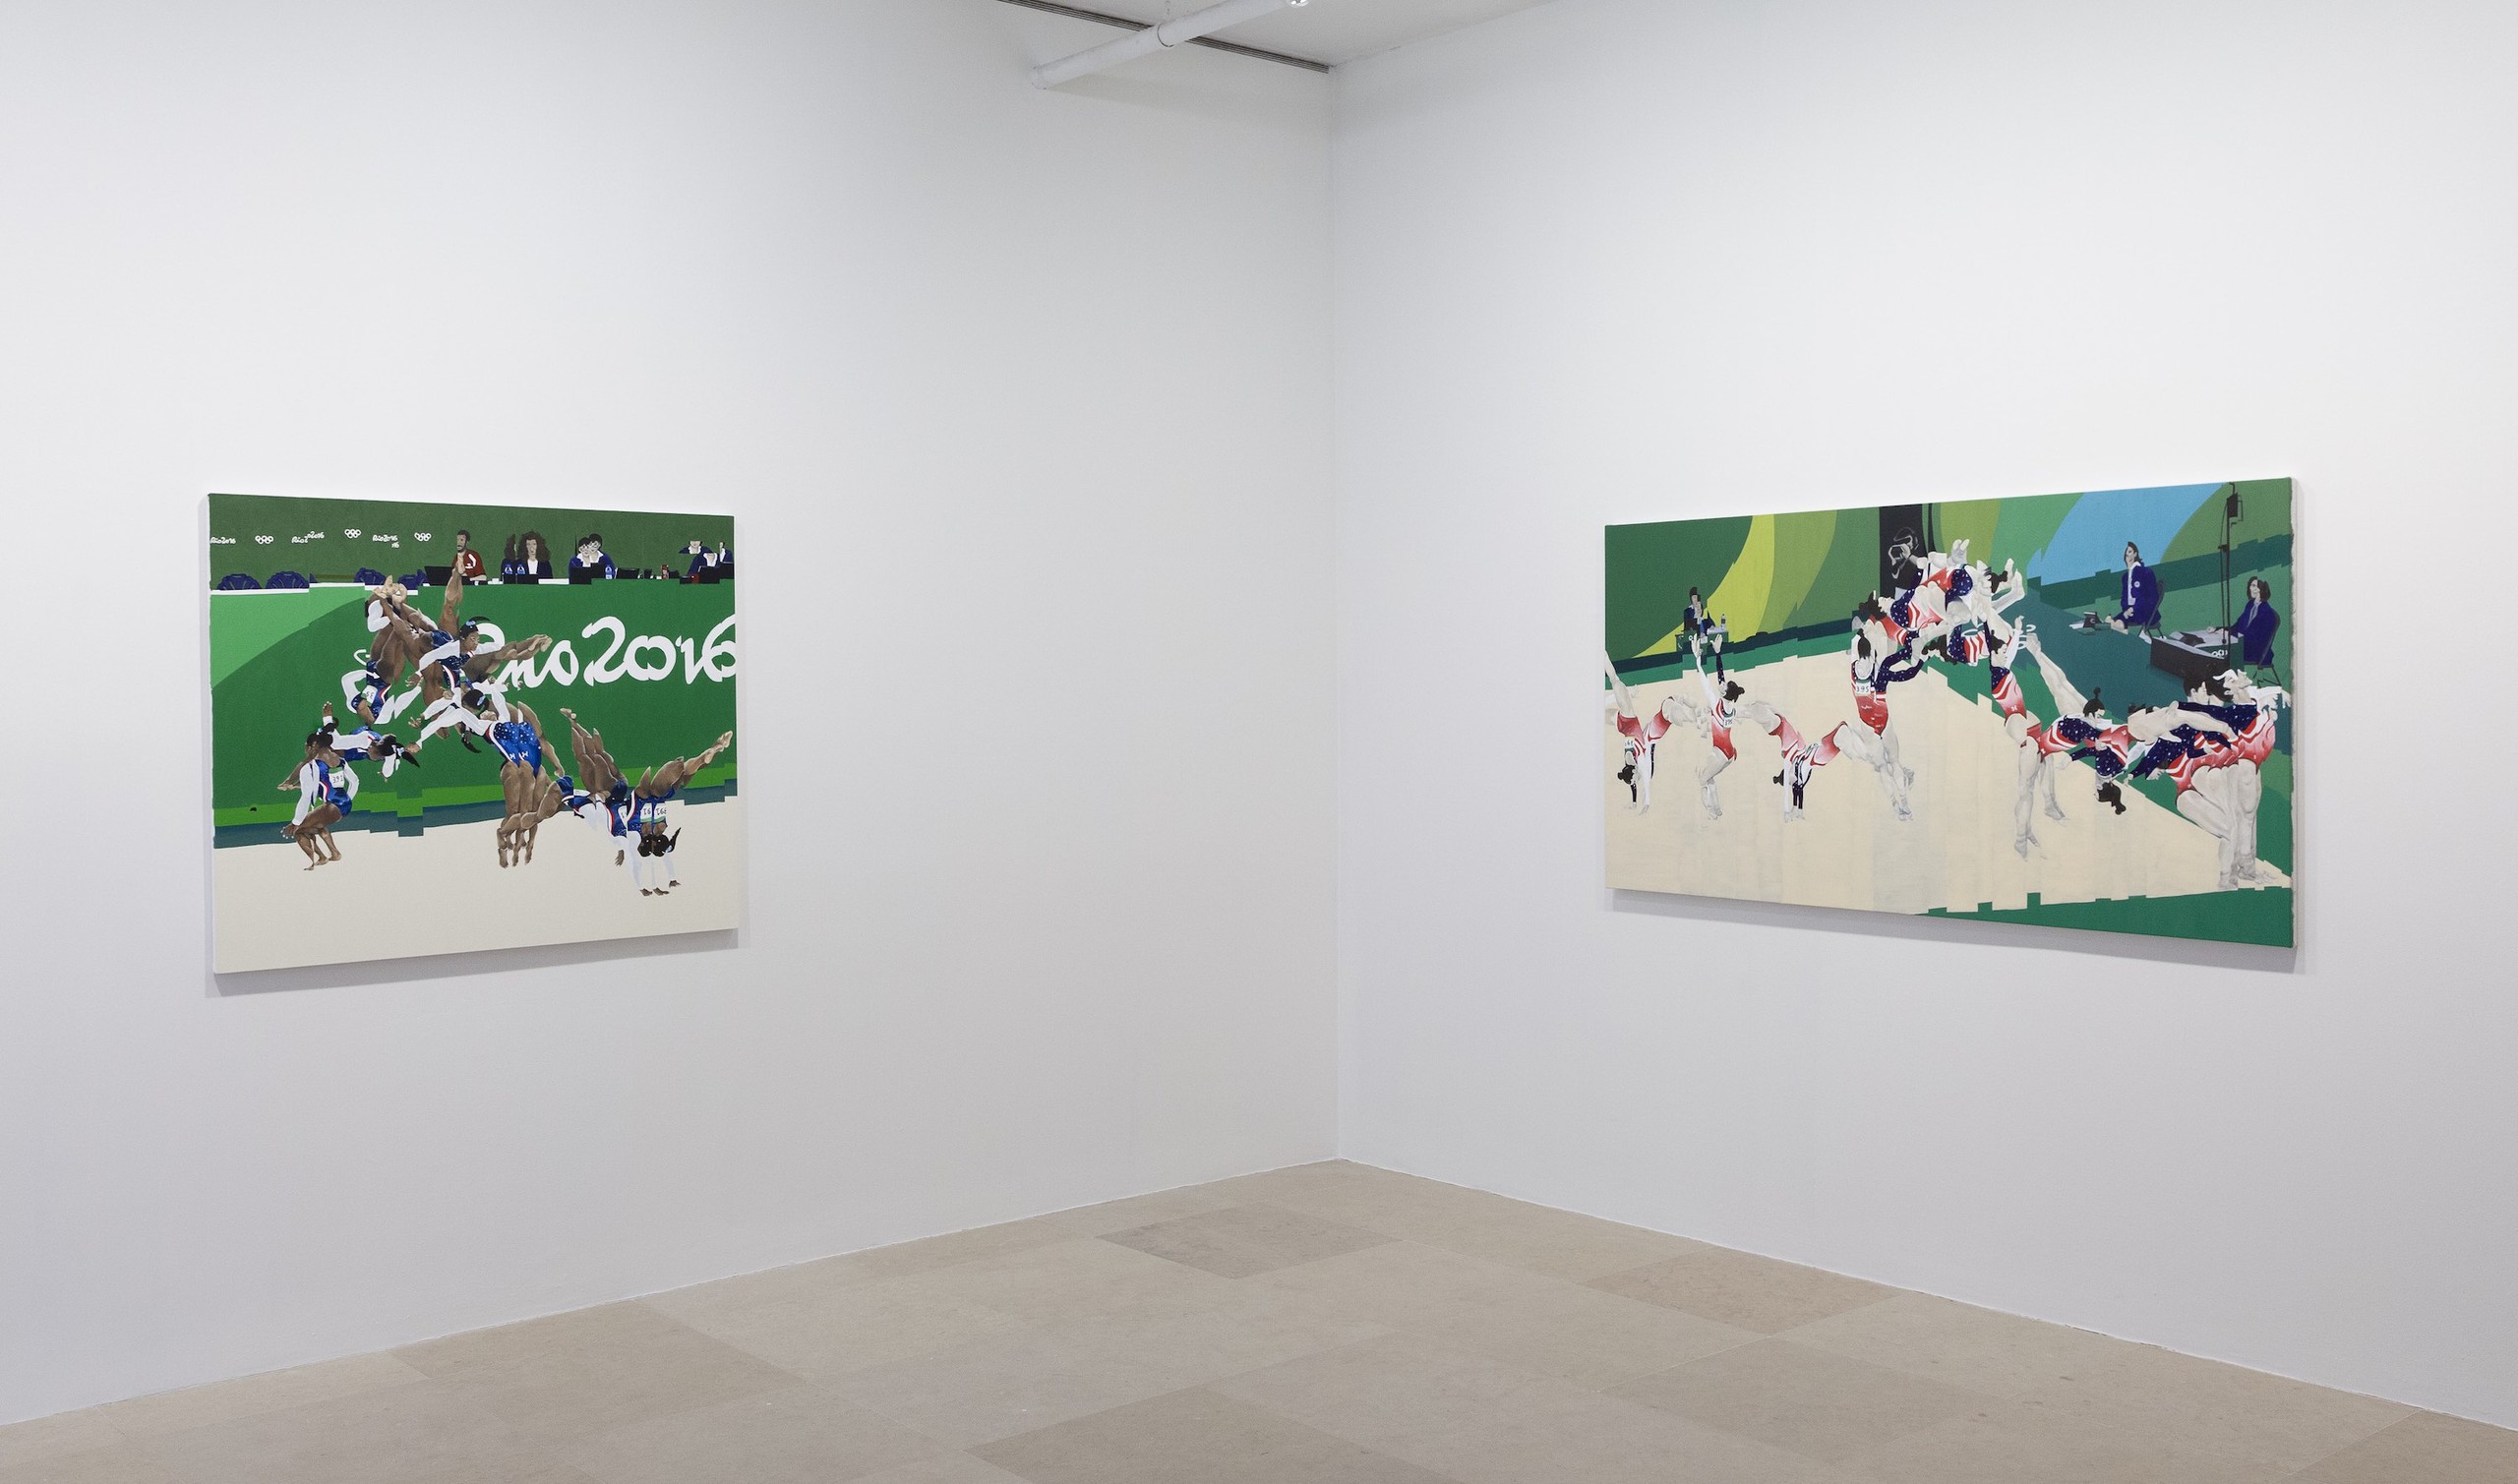 Installation view, Painting: Now and Forever, Part III, Greene Naftali Gallery, Matthew Marks Gallery, New York, 2018